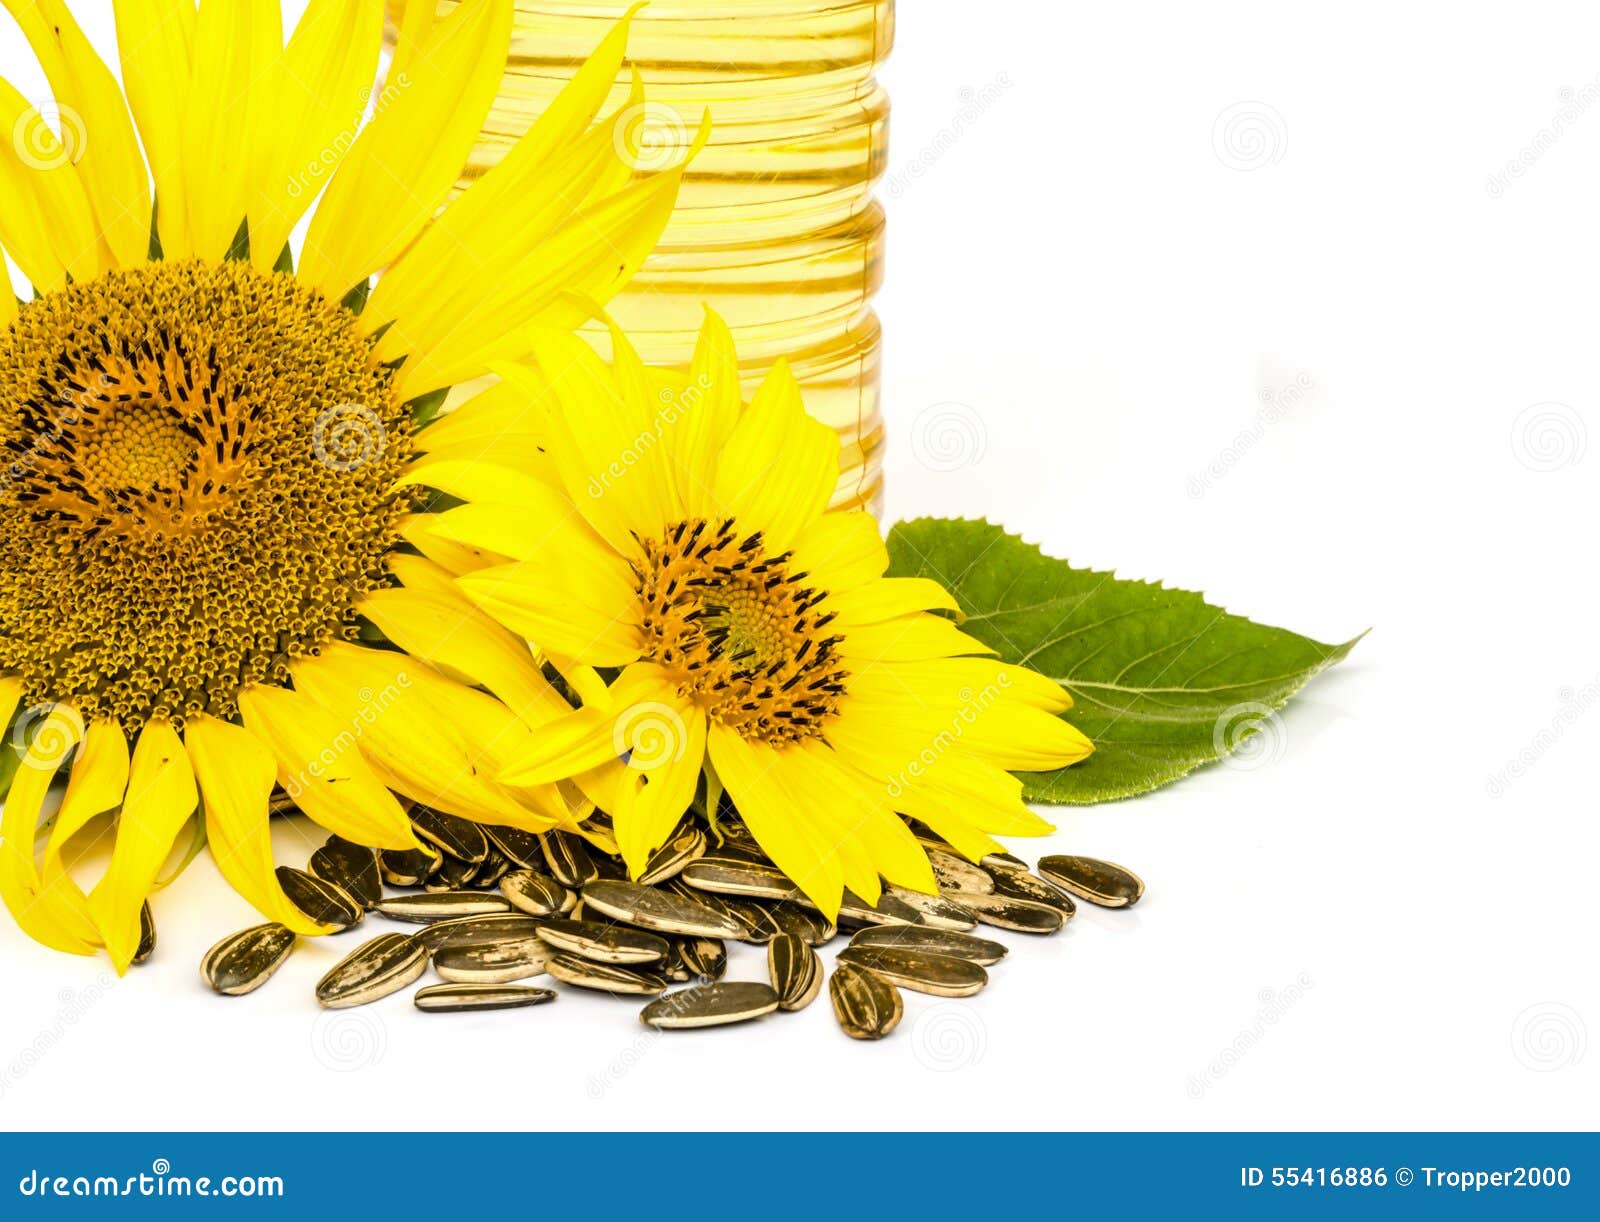 Sunflower oil. stock photo. Image of flower, food, floral - 55416886